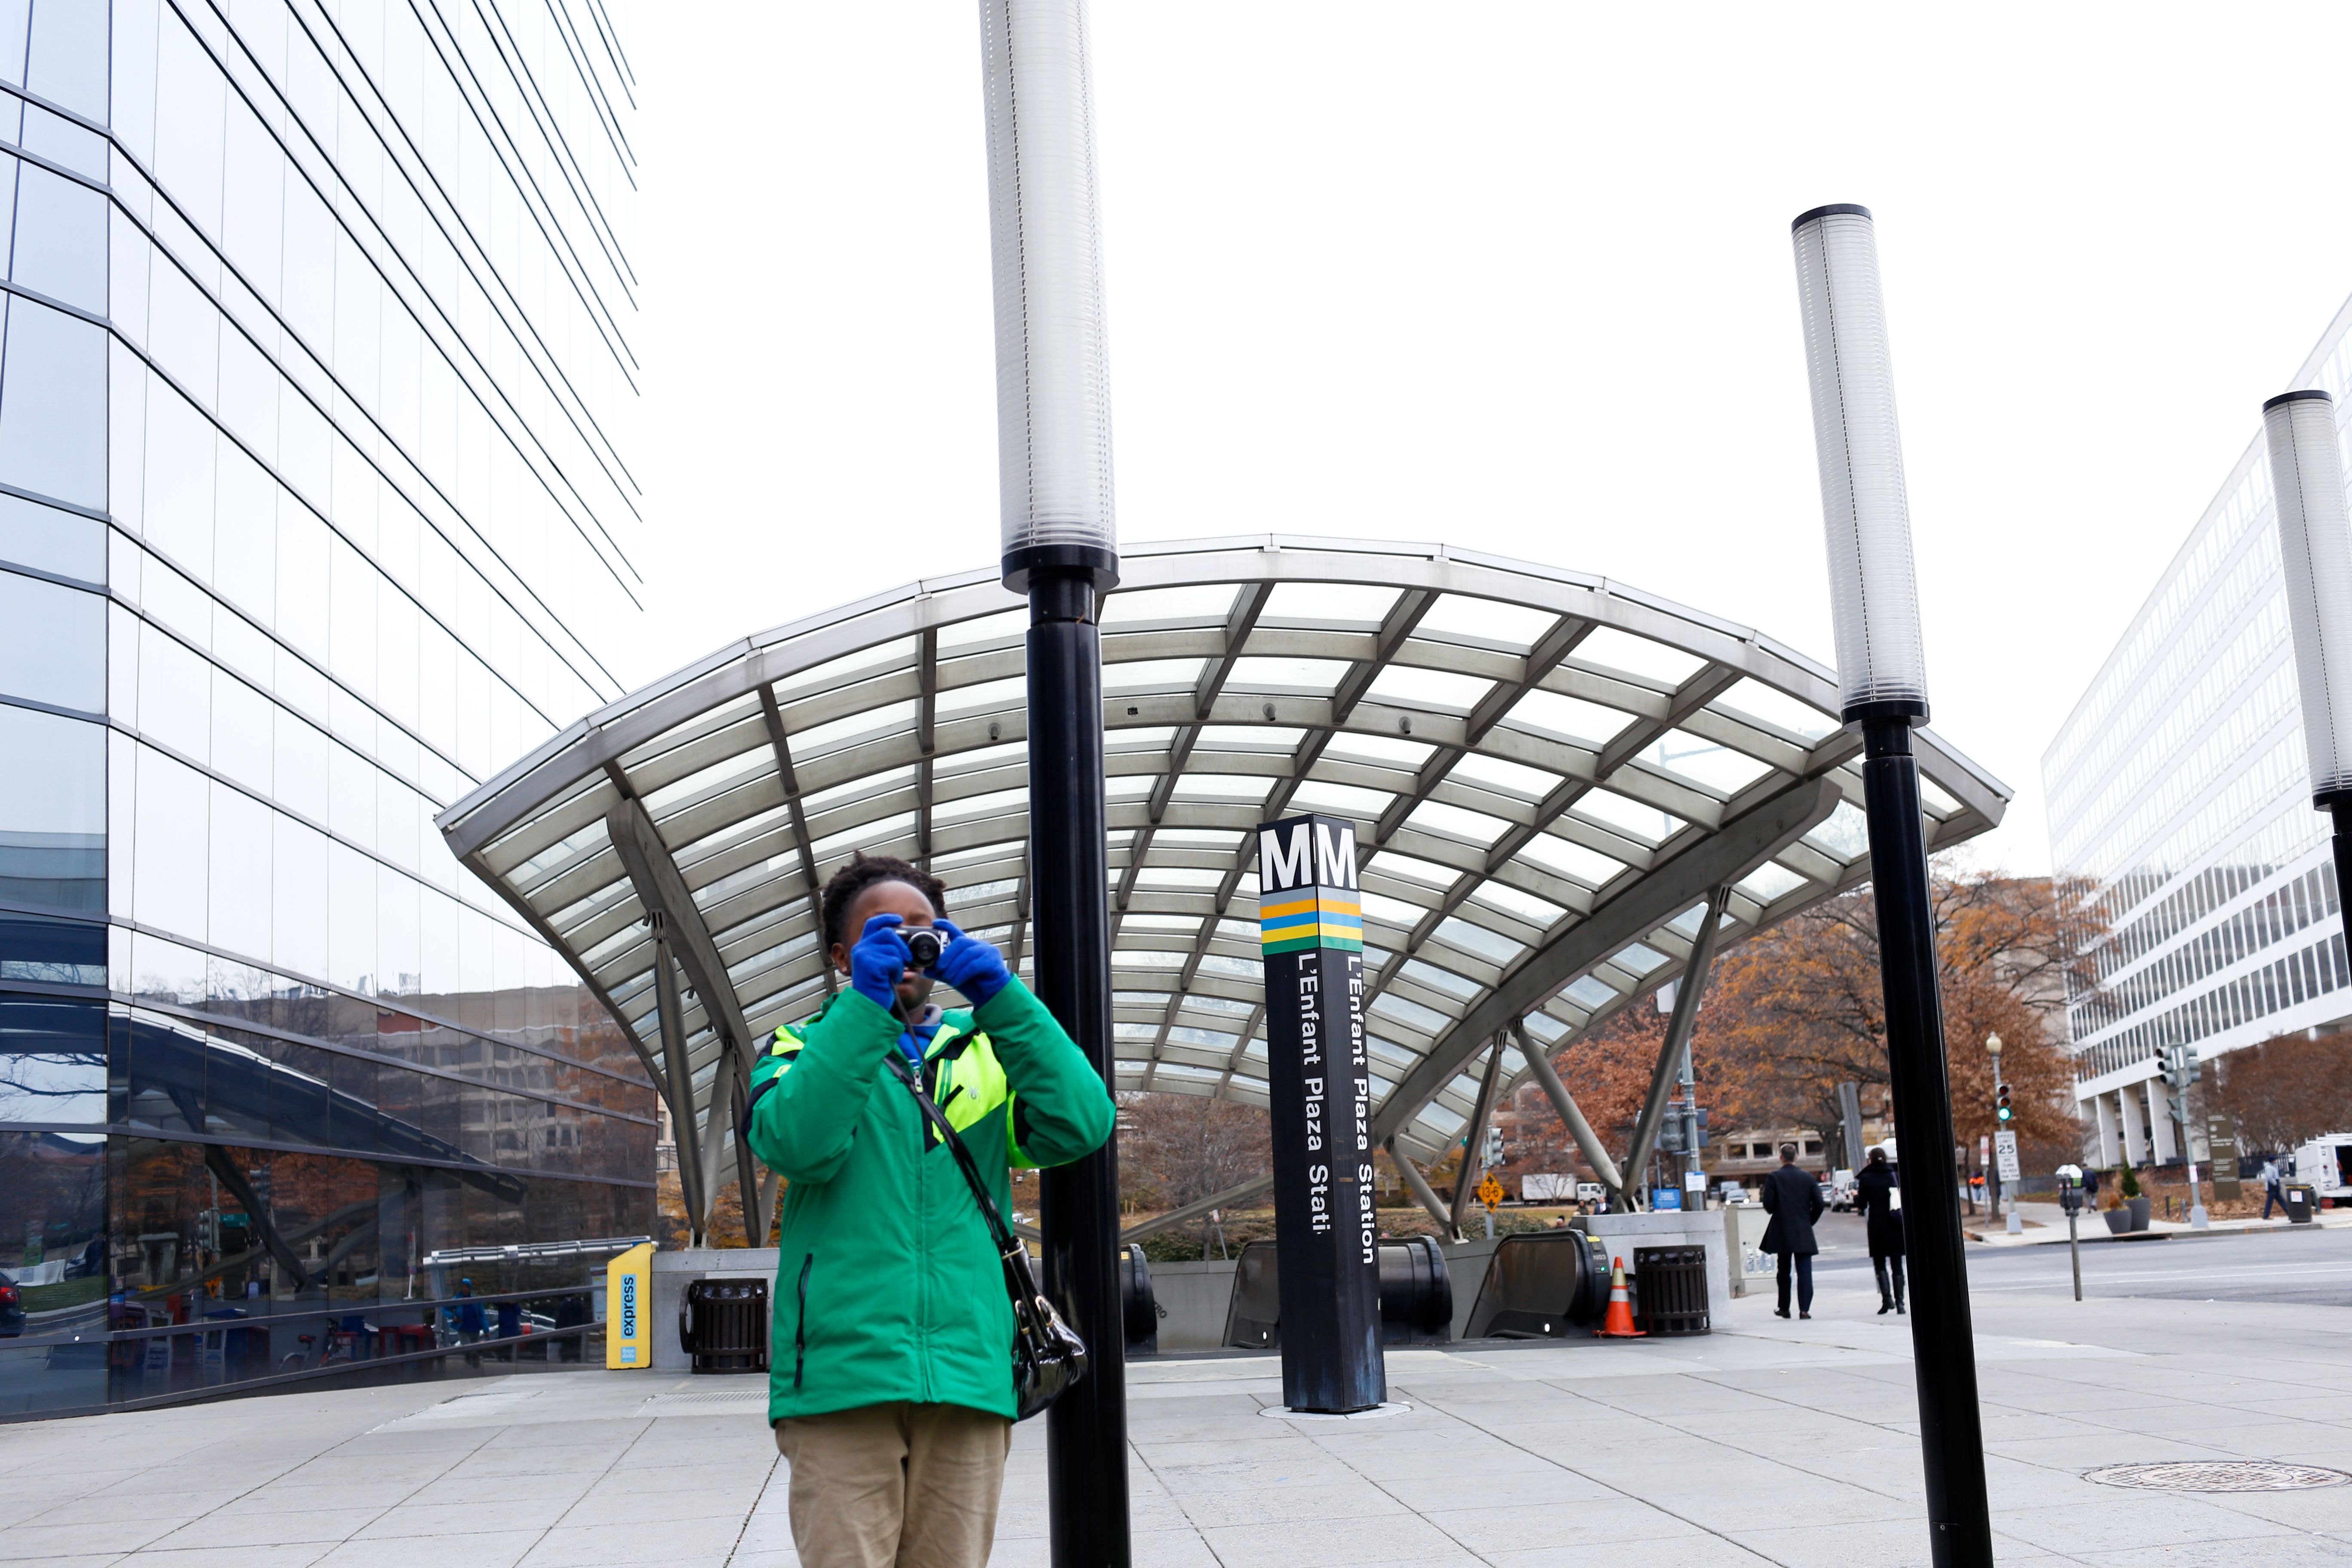 A Washington Global student takes a photo in L'Enfant Plaza. Image by Eslah Attar. United States, 2017.